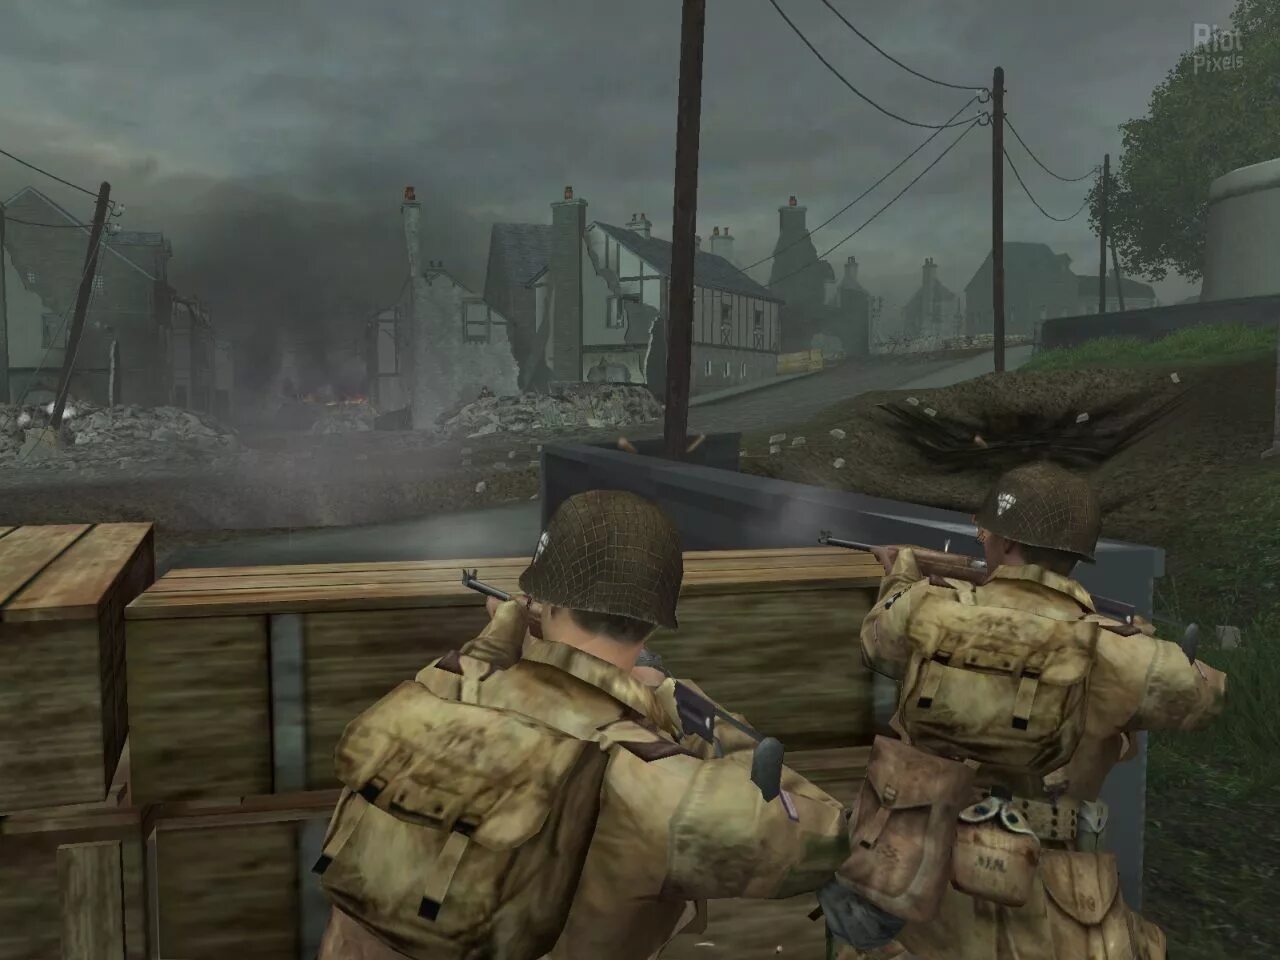 Brothers in arms earned. Игра brothers in Arms earned in Blood. Brothers in Arms: earned in Blood. Brothers in Arms: earned in Blood (2005). Brothers in Arms earned in Blood ps2.